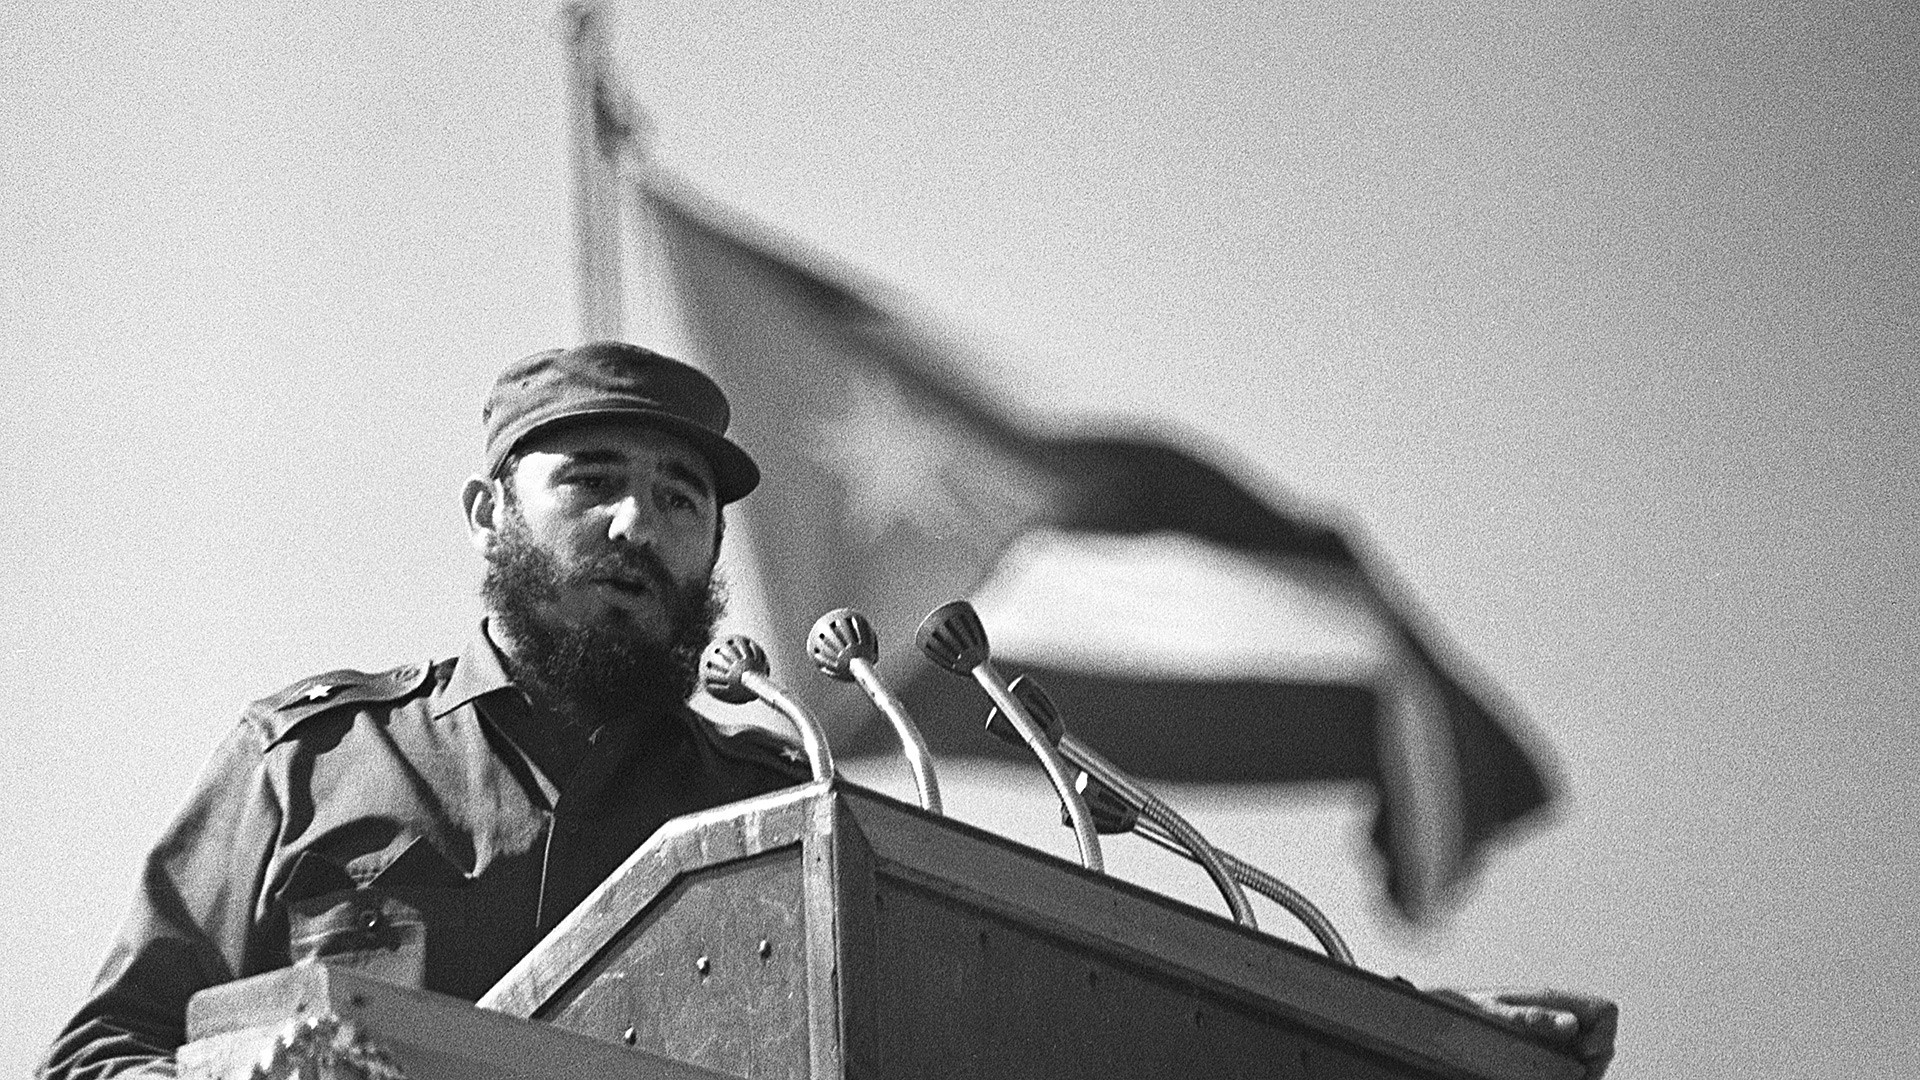 Fidel Castro: Officially stepped down as president of Cuba in 2008. 1920x1080 Full HD Wallpaper.